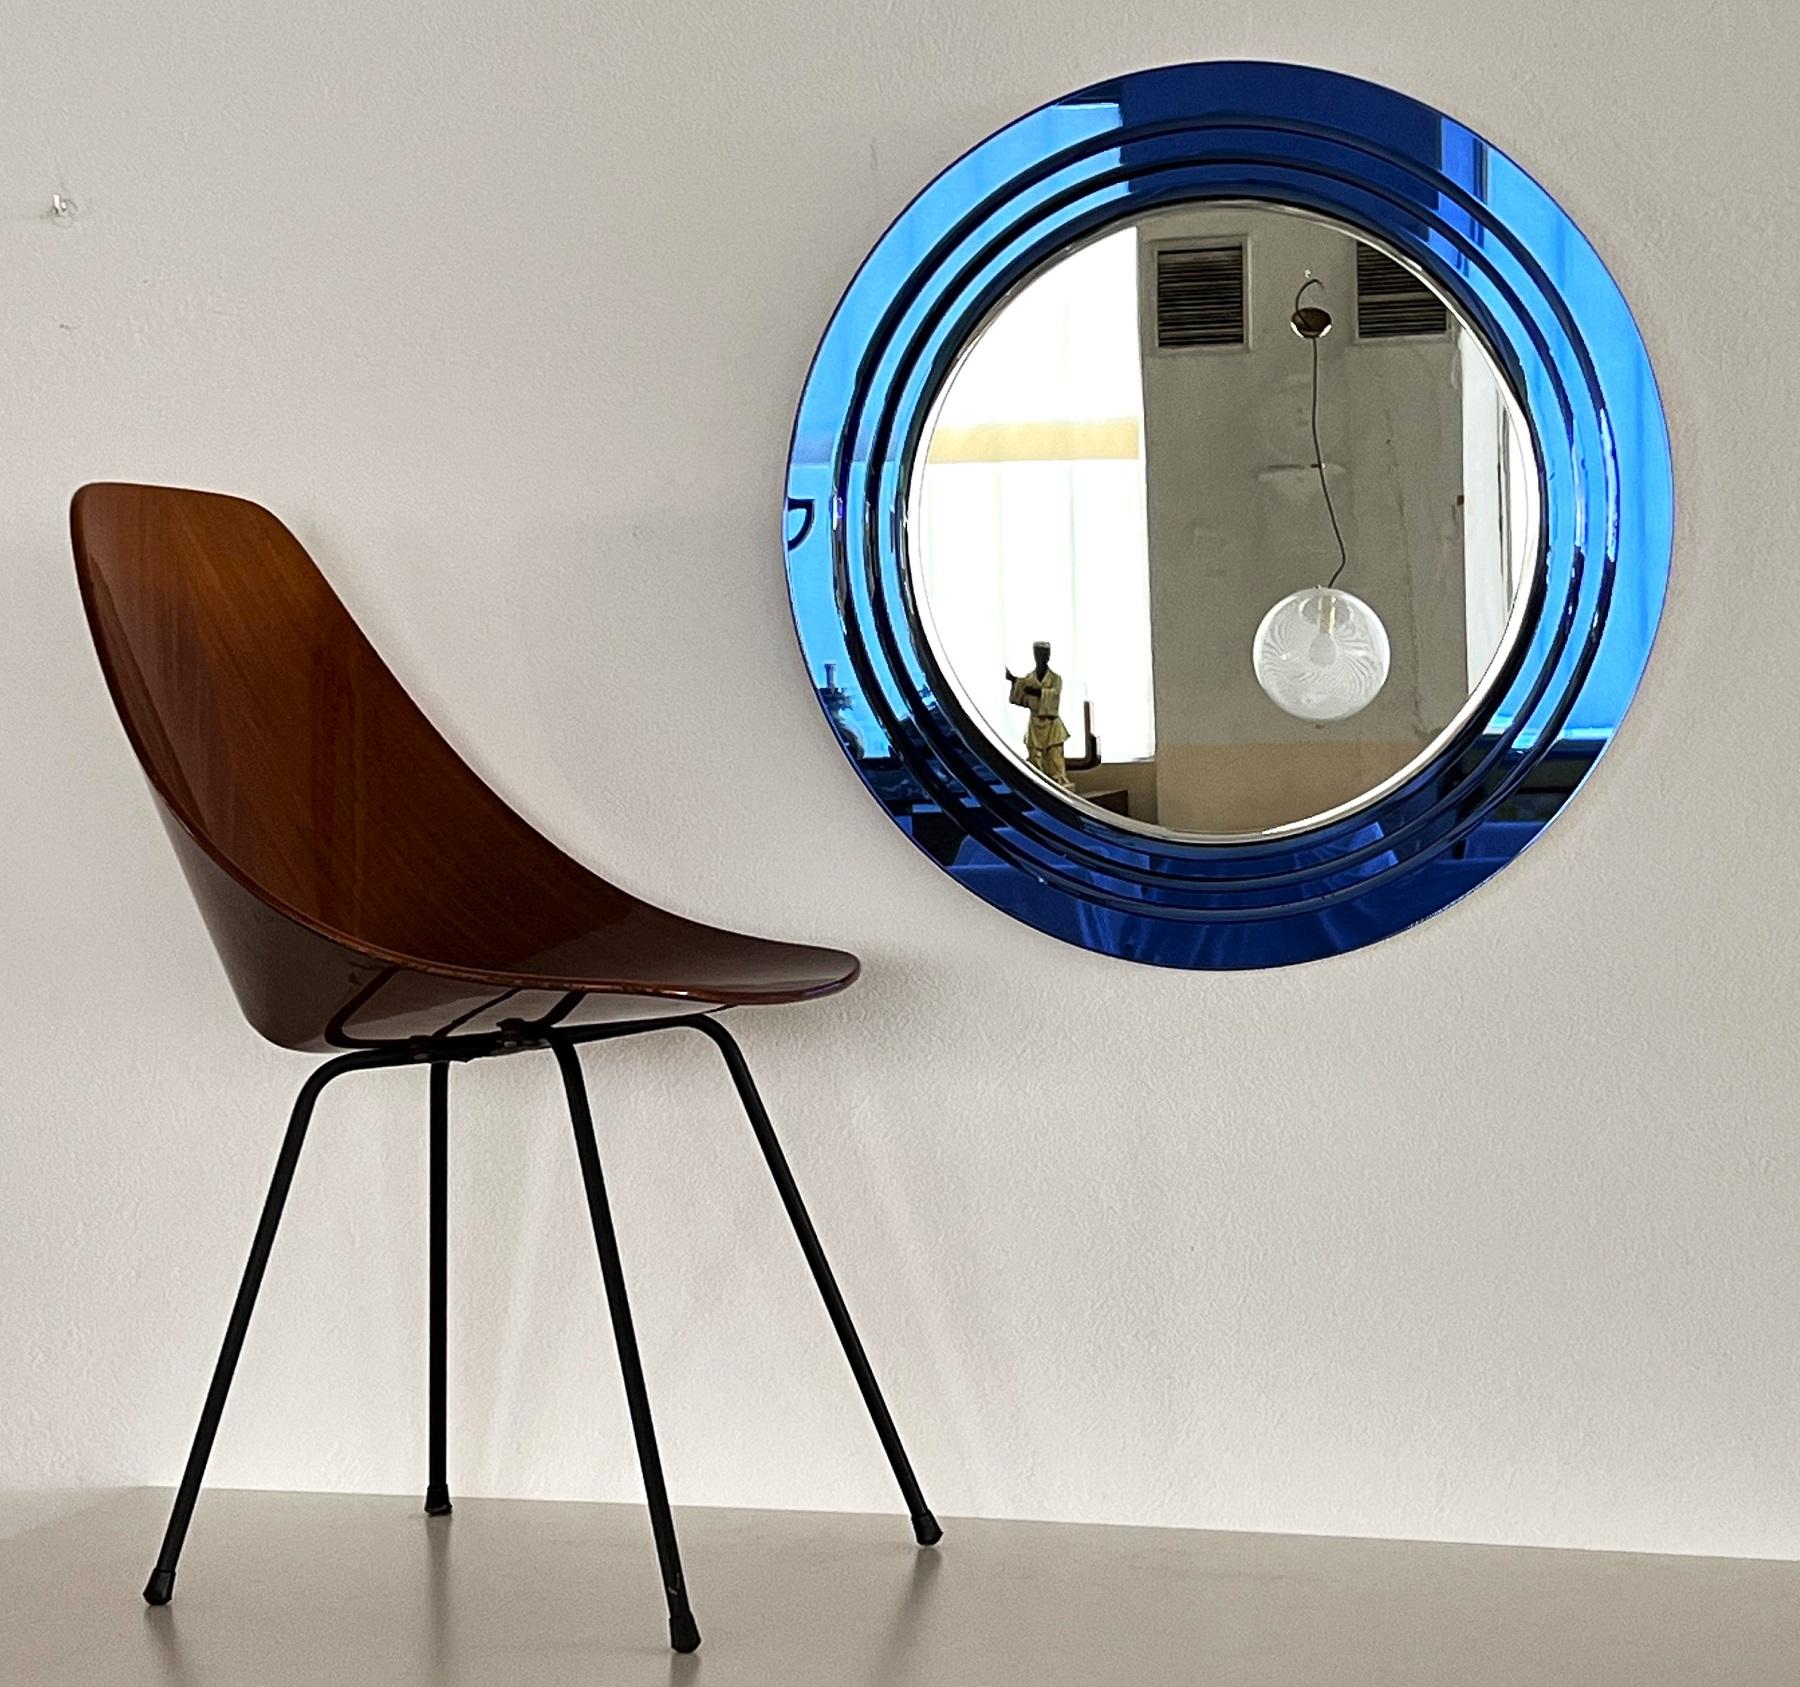 Magnificent large wall mirror made of 3 layers of cut glass in shiny blue color.
Made in Italy in 1971.
The glasses are in very good condition with very few and smallest spots under the blue glass.
The original crystal mirror glass in the middle is